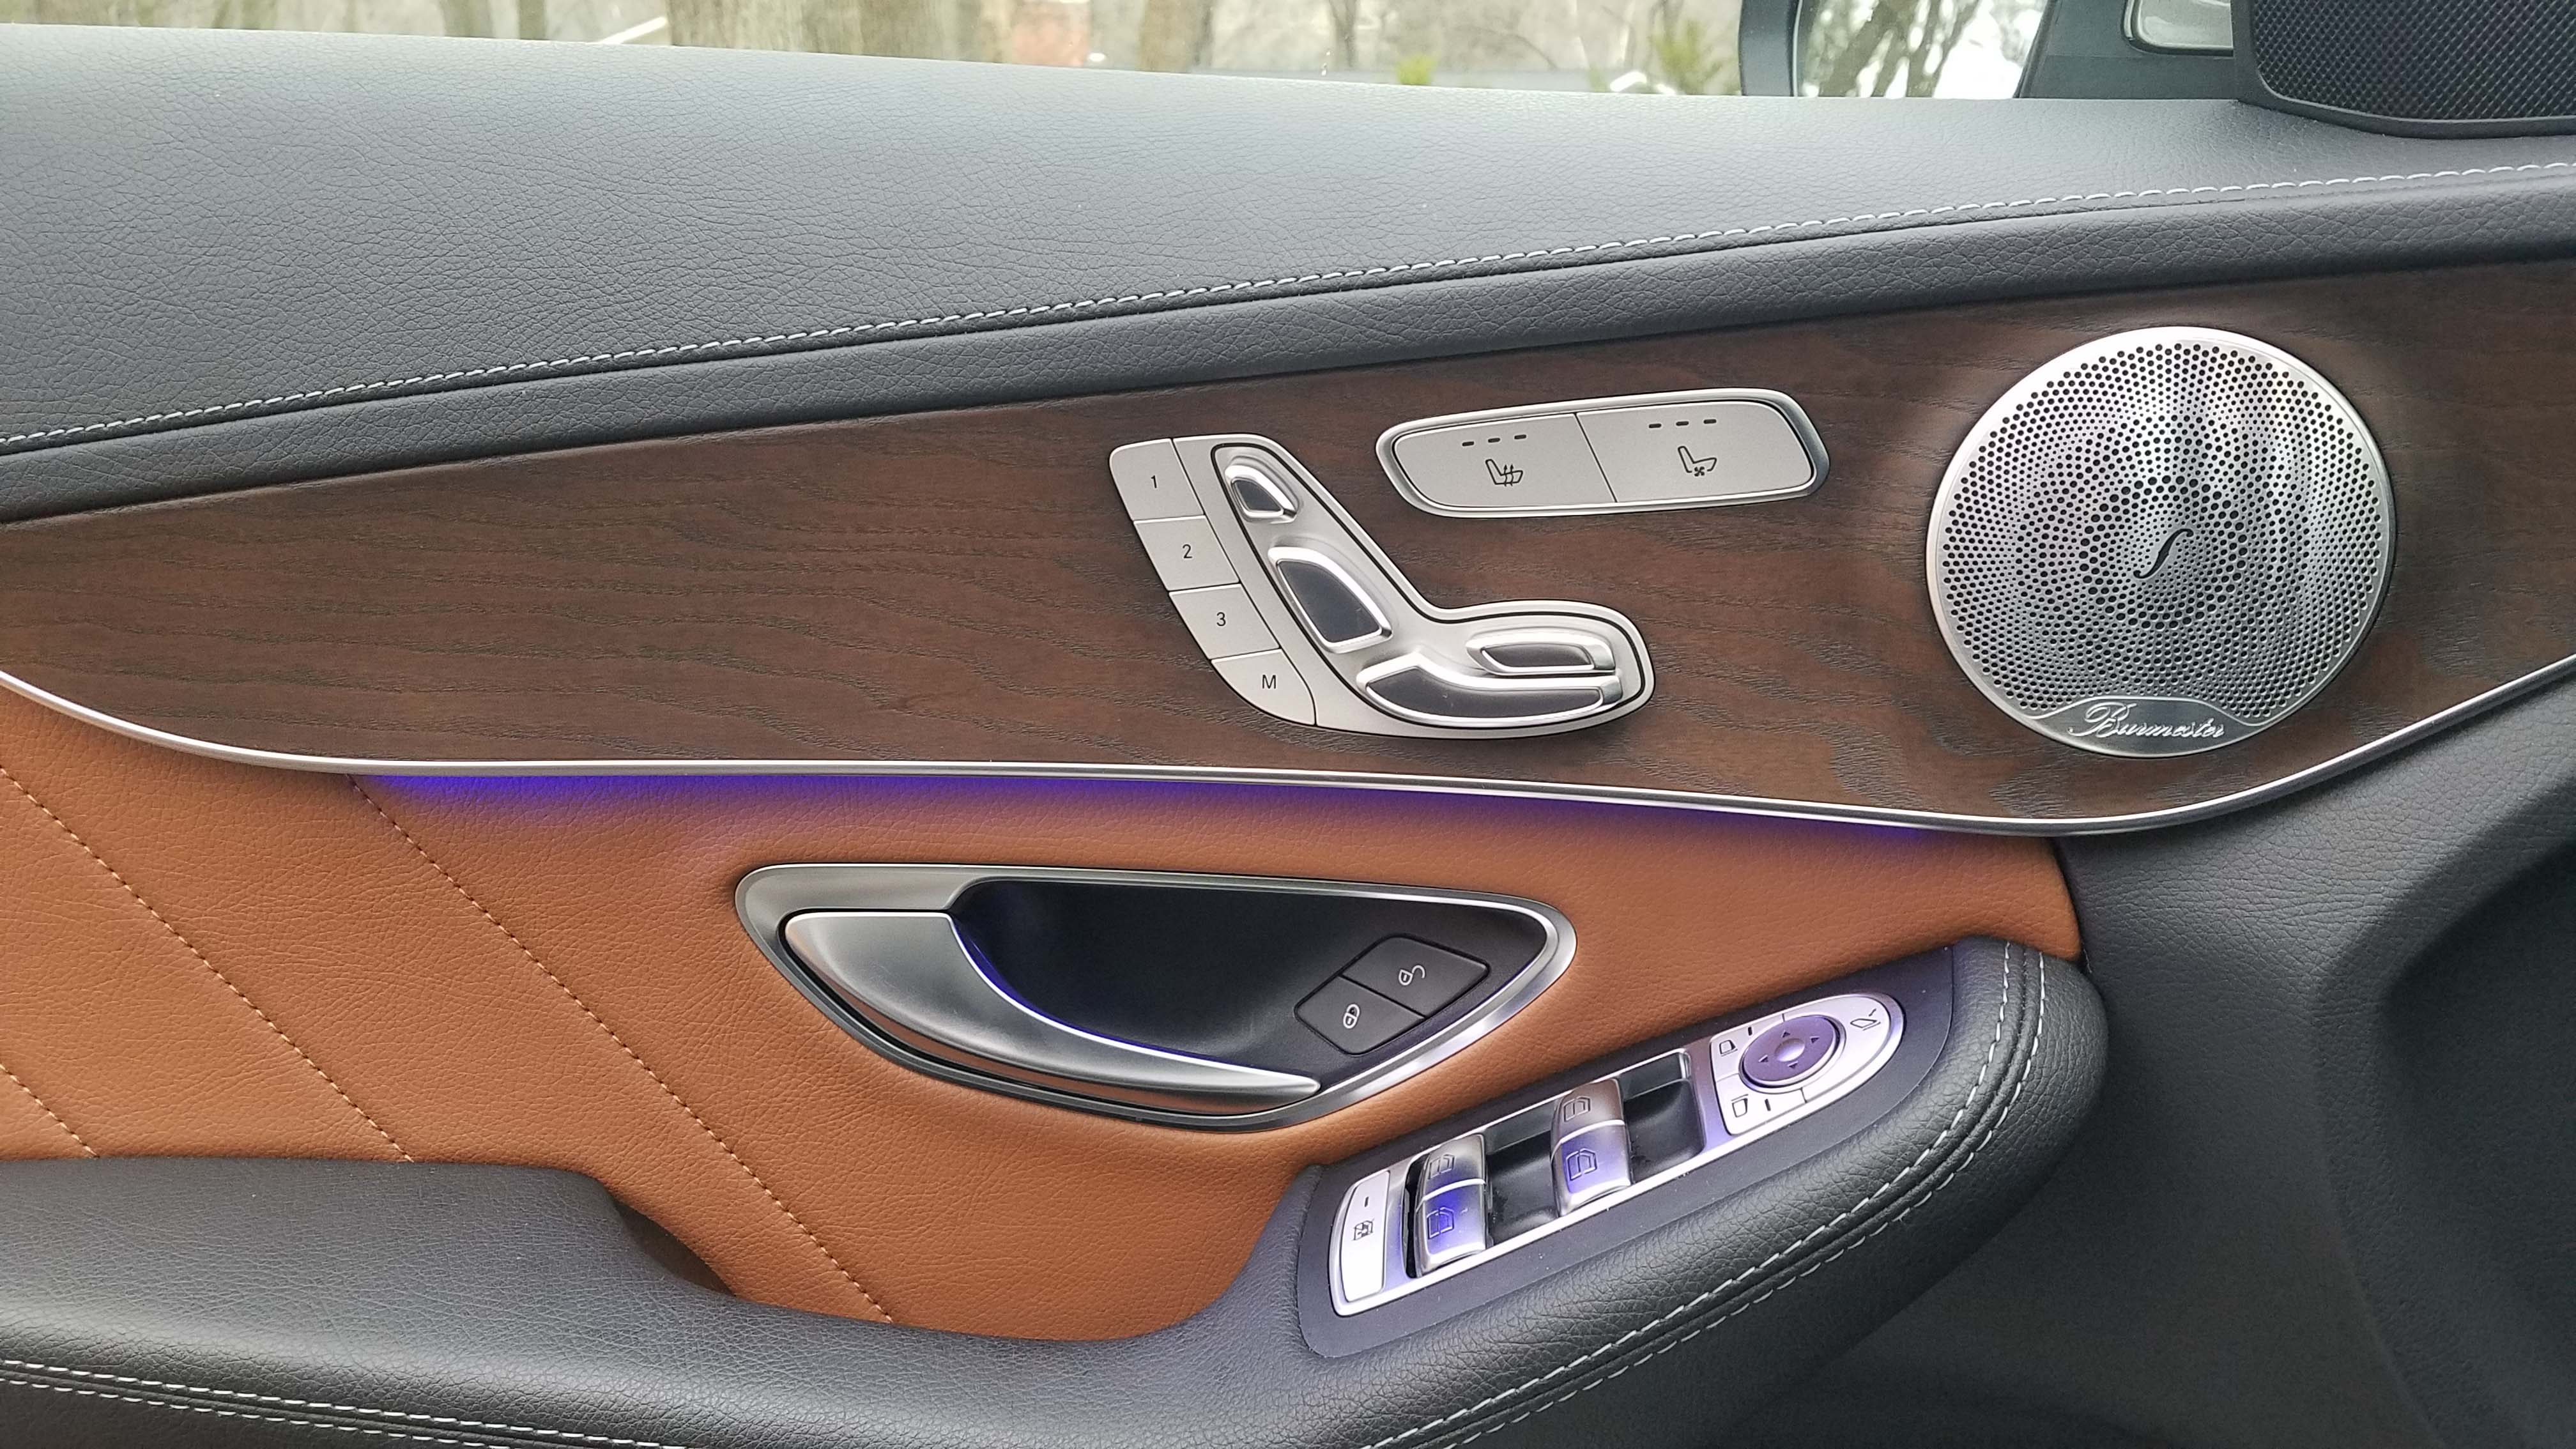 The 2019 Mercedes C300 features exquisite, premium controls and materials as seen on its driver's door.